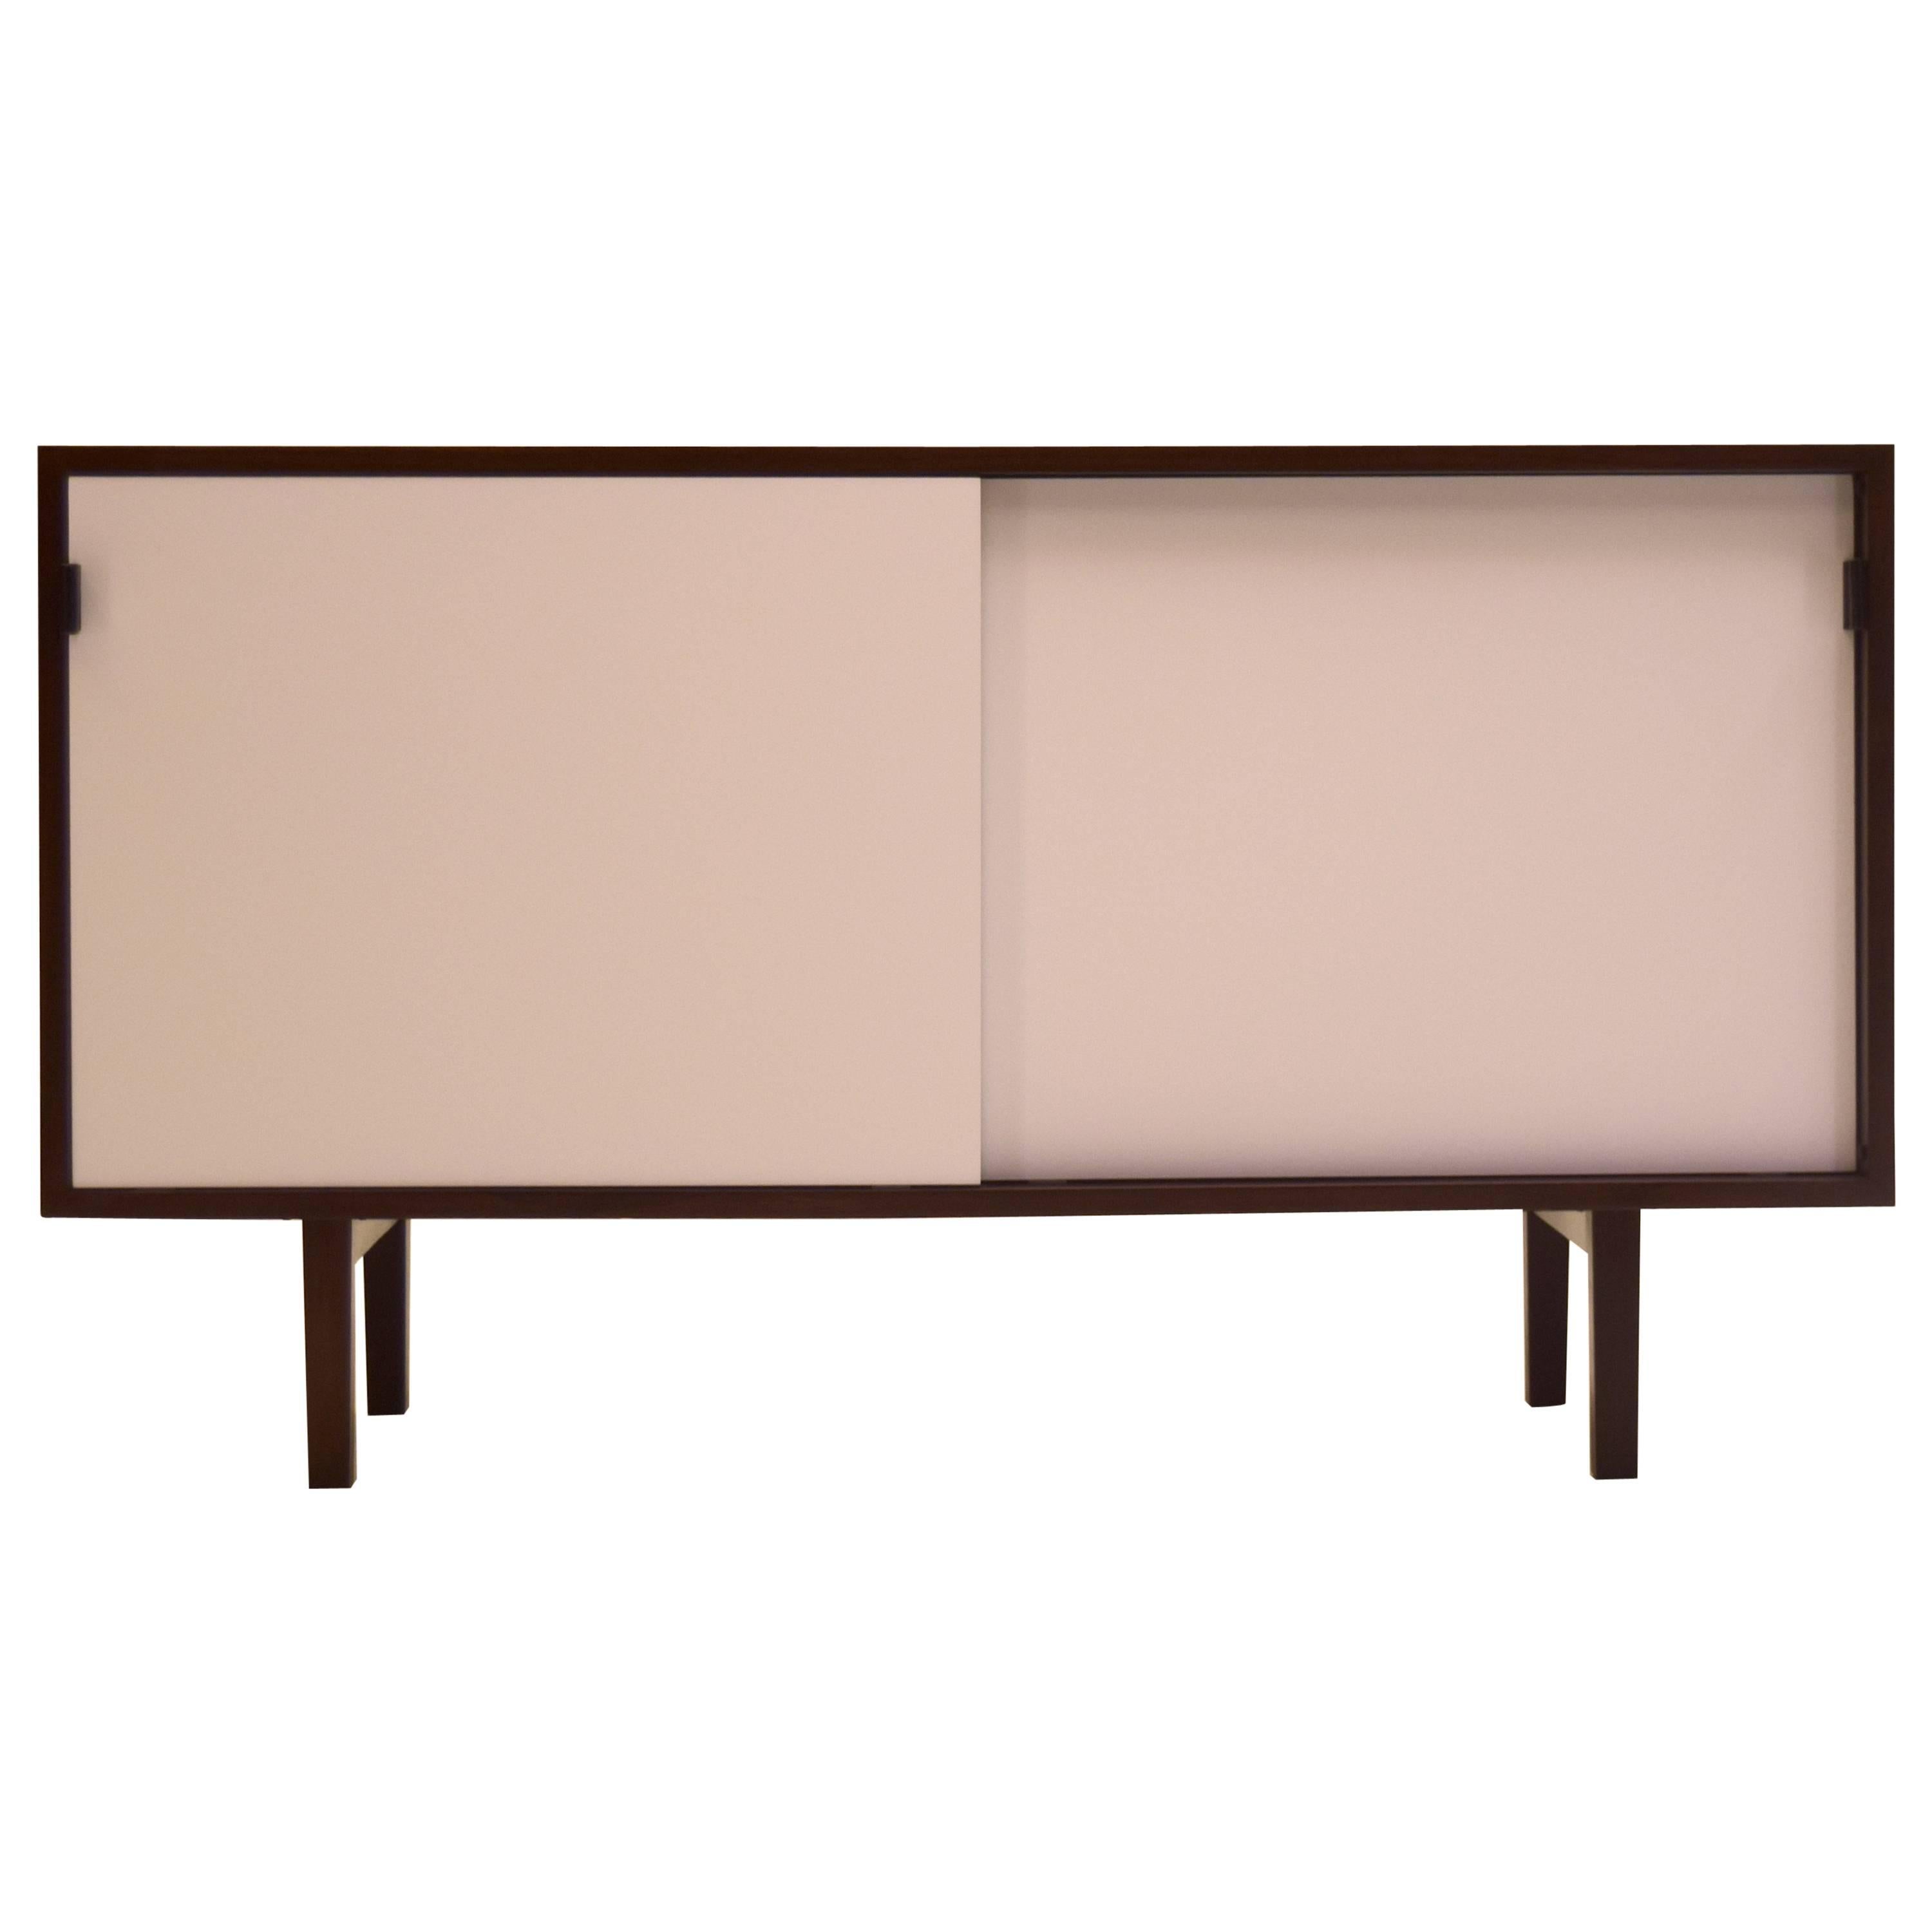 Vintage though nearly like new, this sideboard features white lacquered doors, mortised rosewood and has been out of production for quite some time, circa 1958-1962.

This particular model also features an ebony finished back so can be displayed